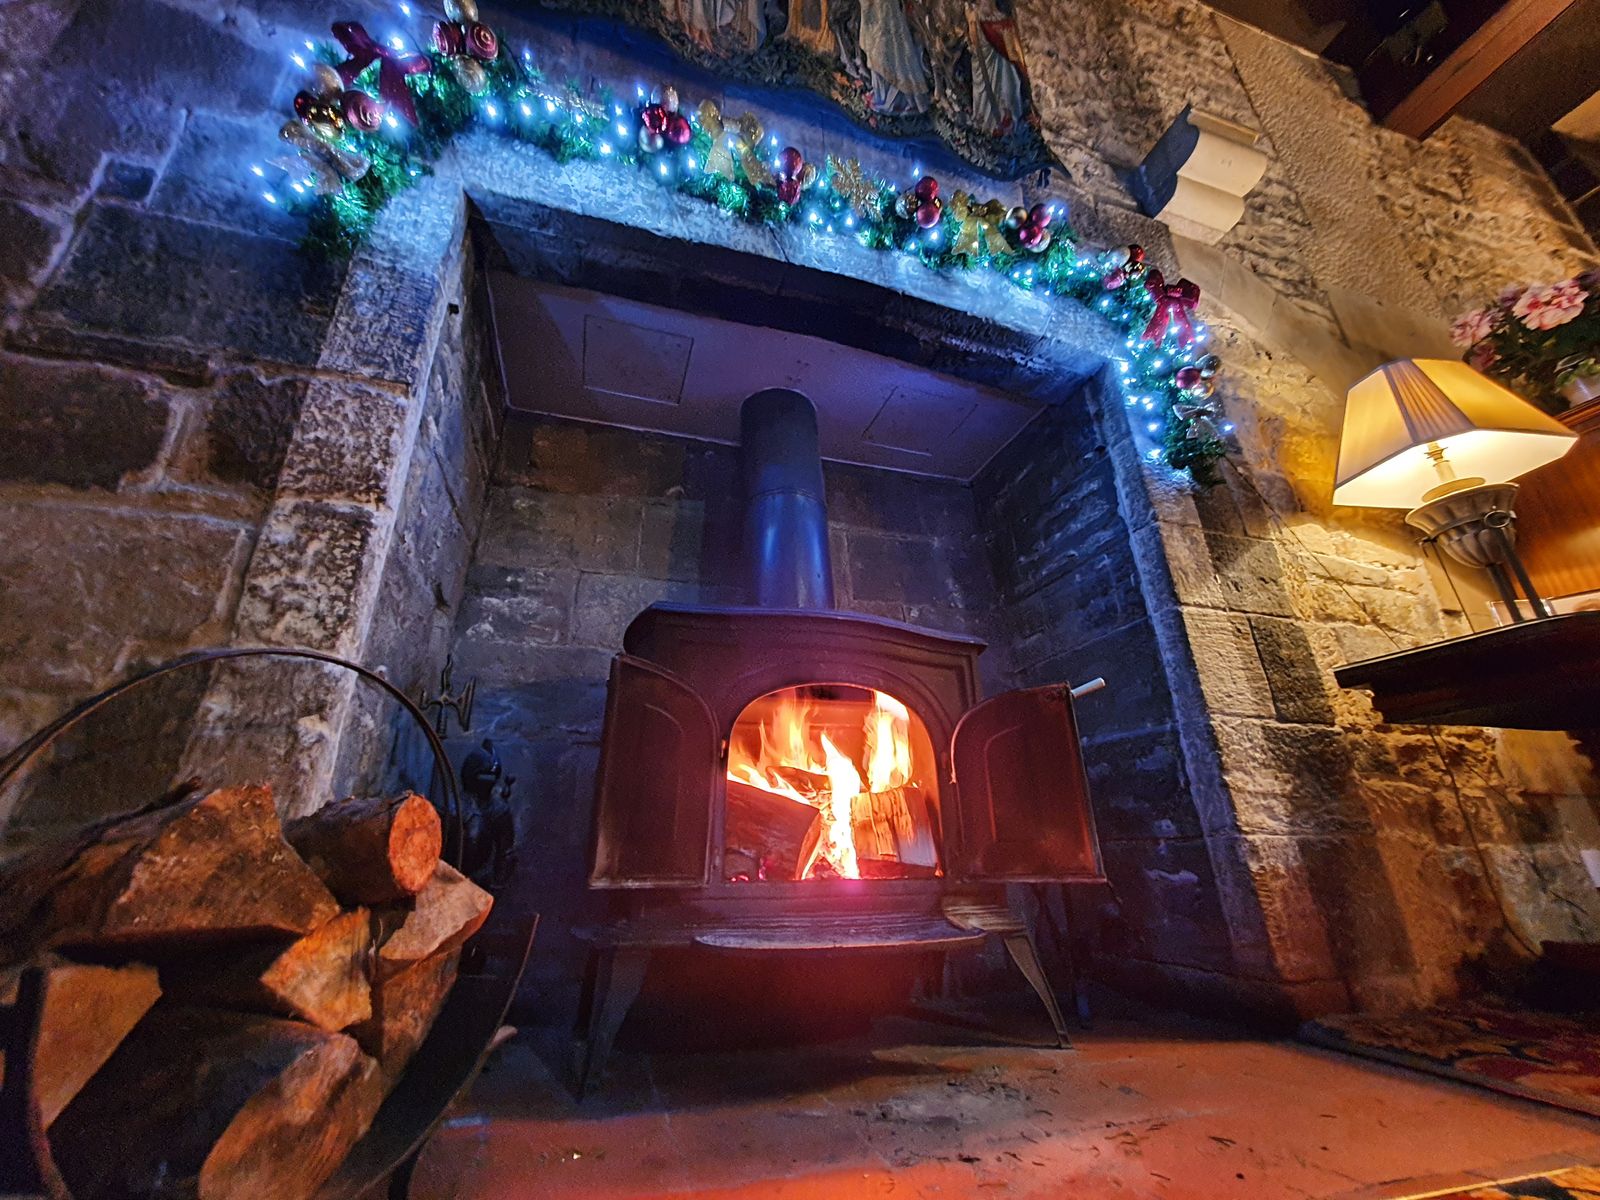 Fireplace and roaring log fire in the Langley Castle drawing room, Northumberland, UK.